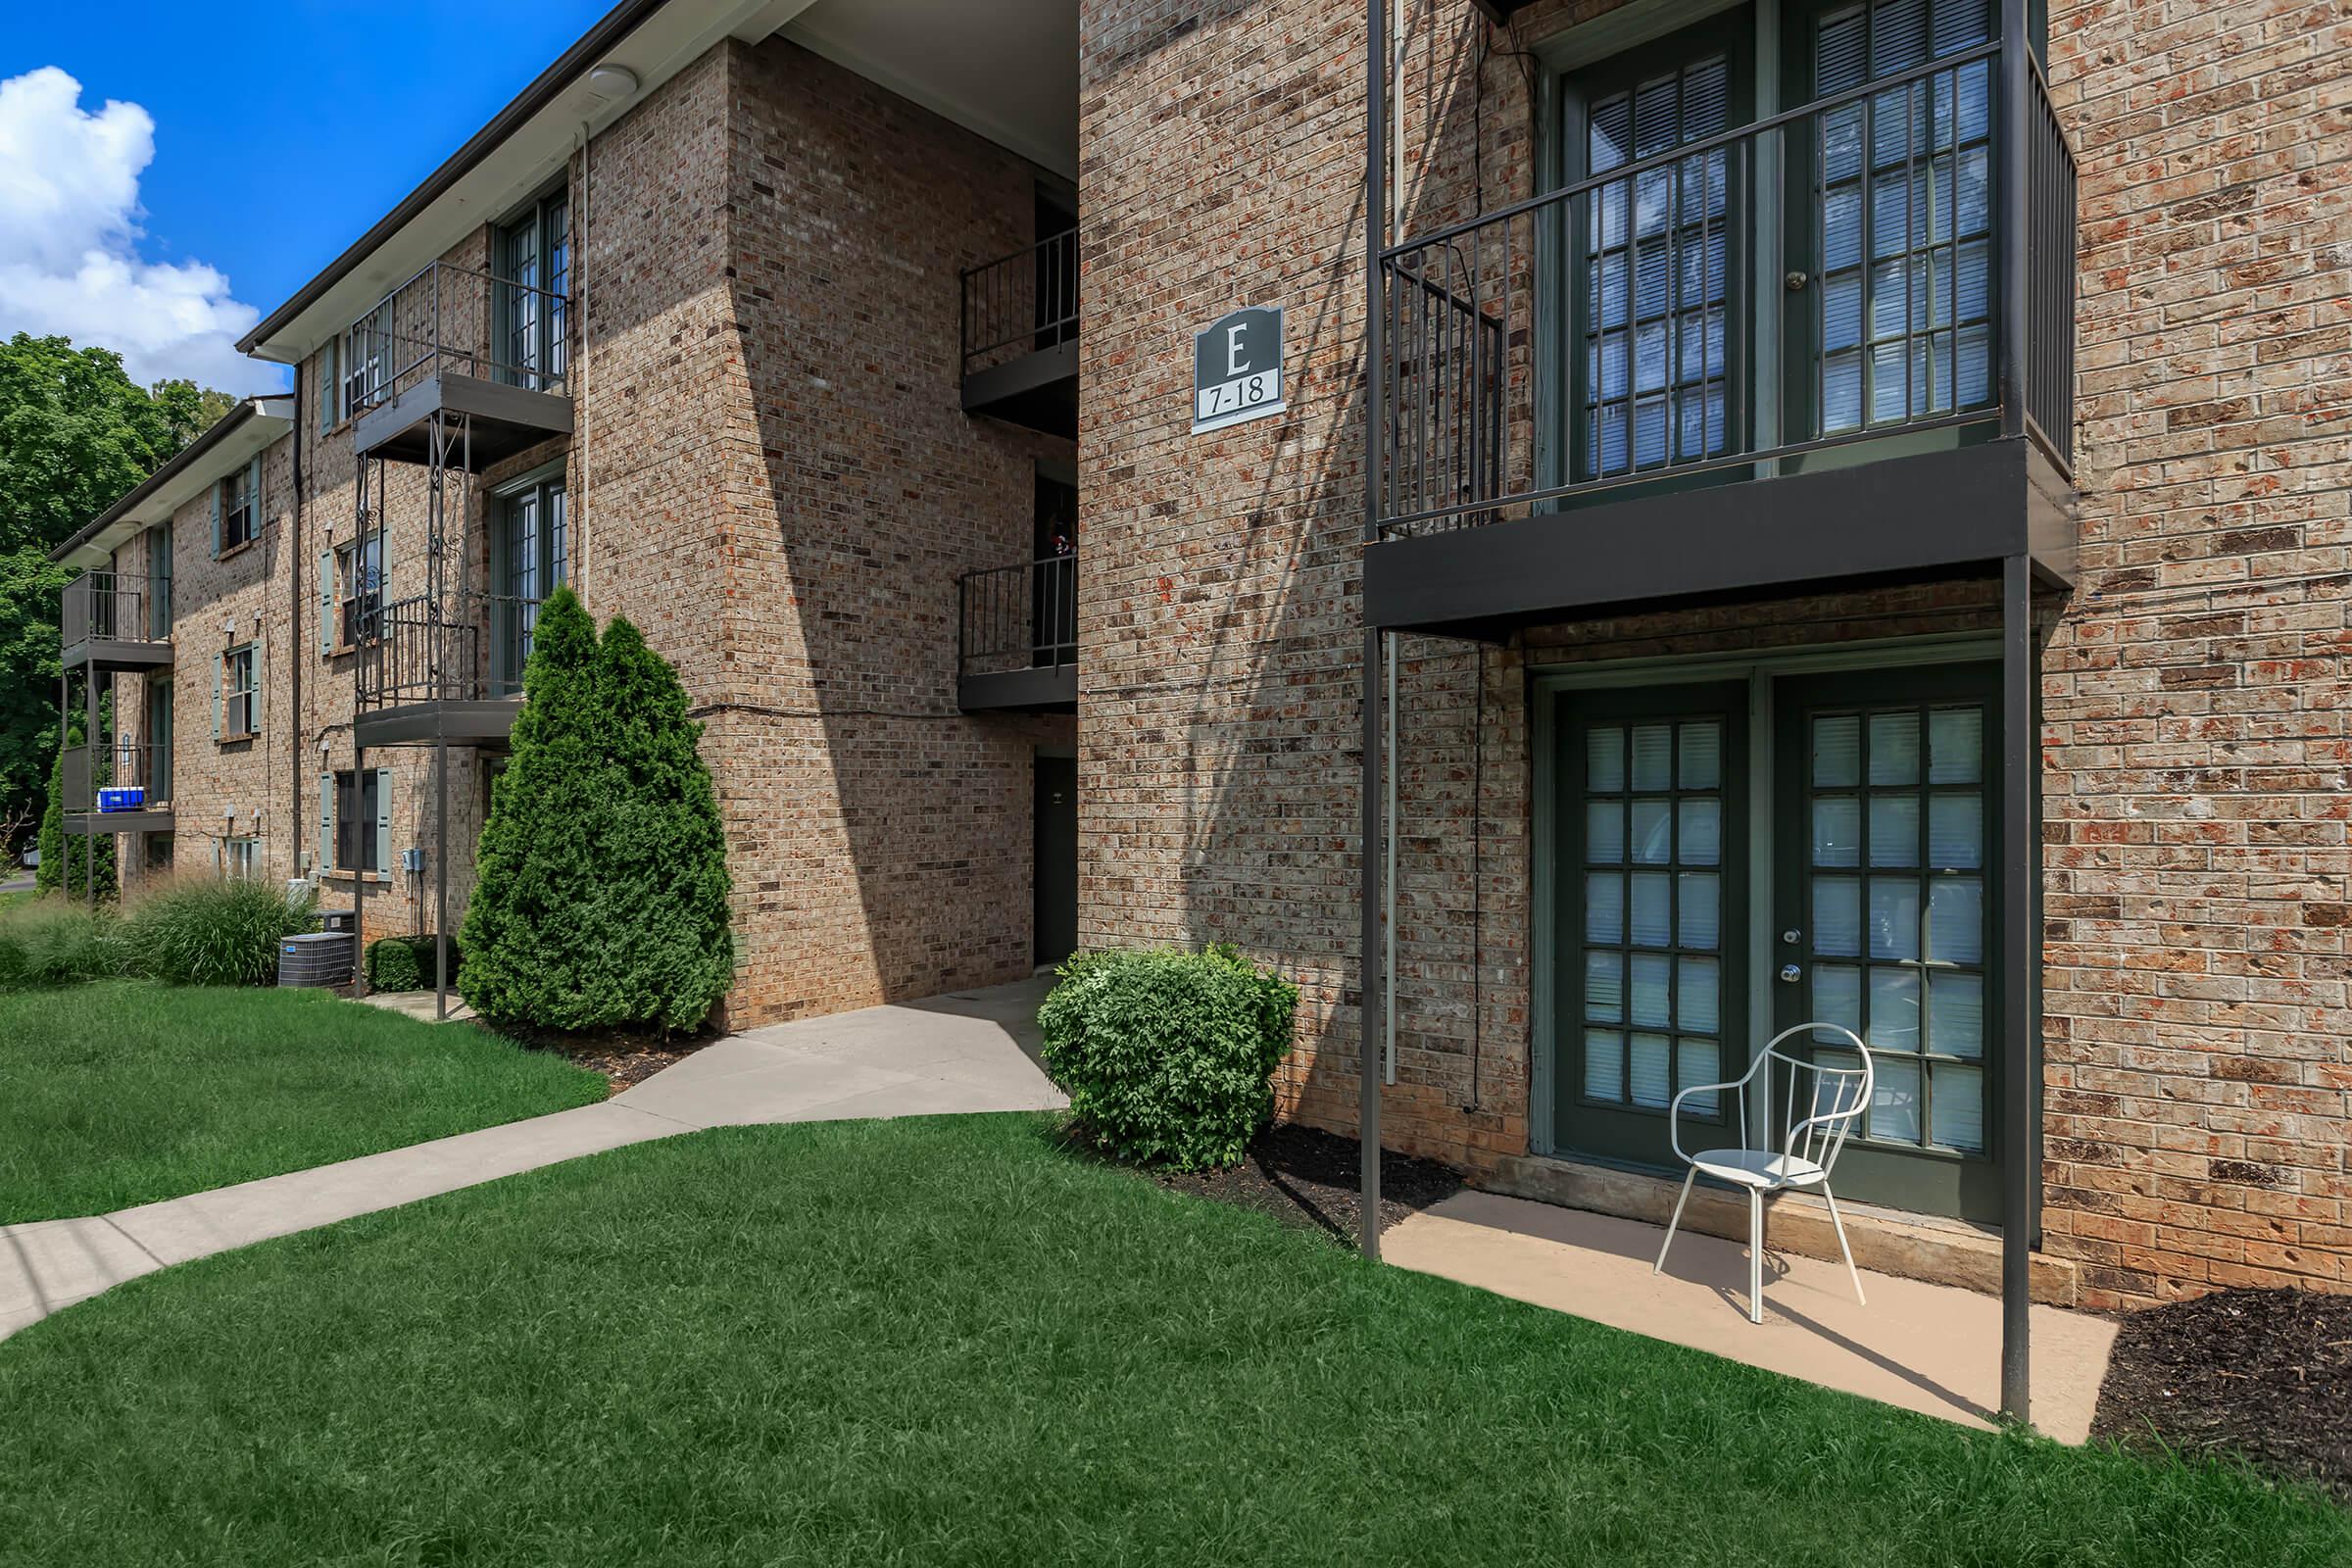 Listen to the sounds of the neighborhood on your balcony or patio in Eagles Crest at Jack Miller in Clarksville, Tennessee 